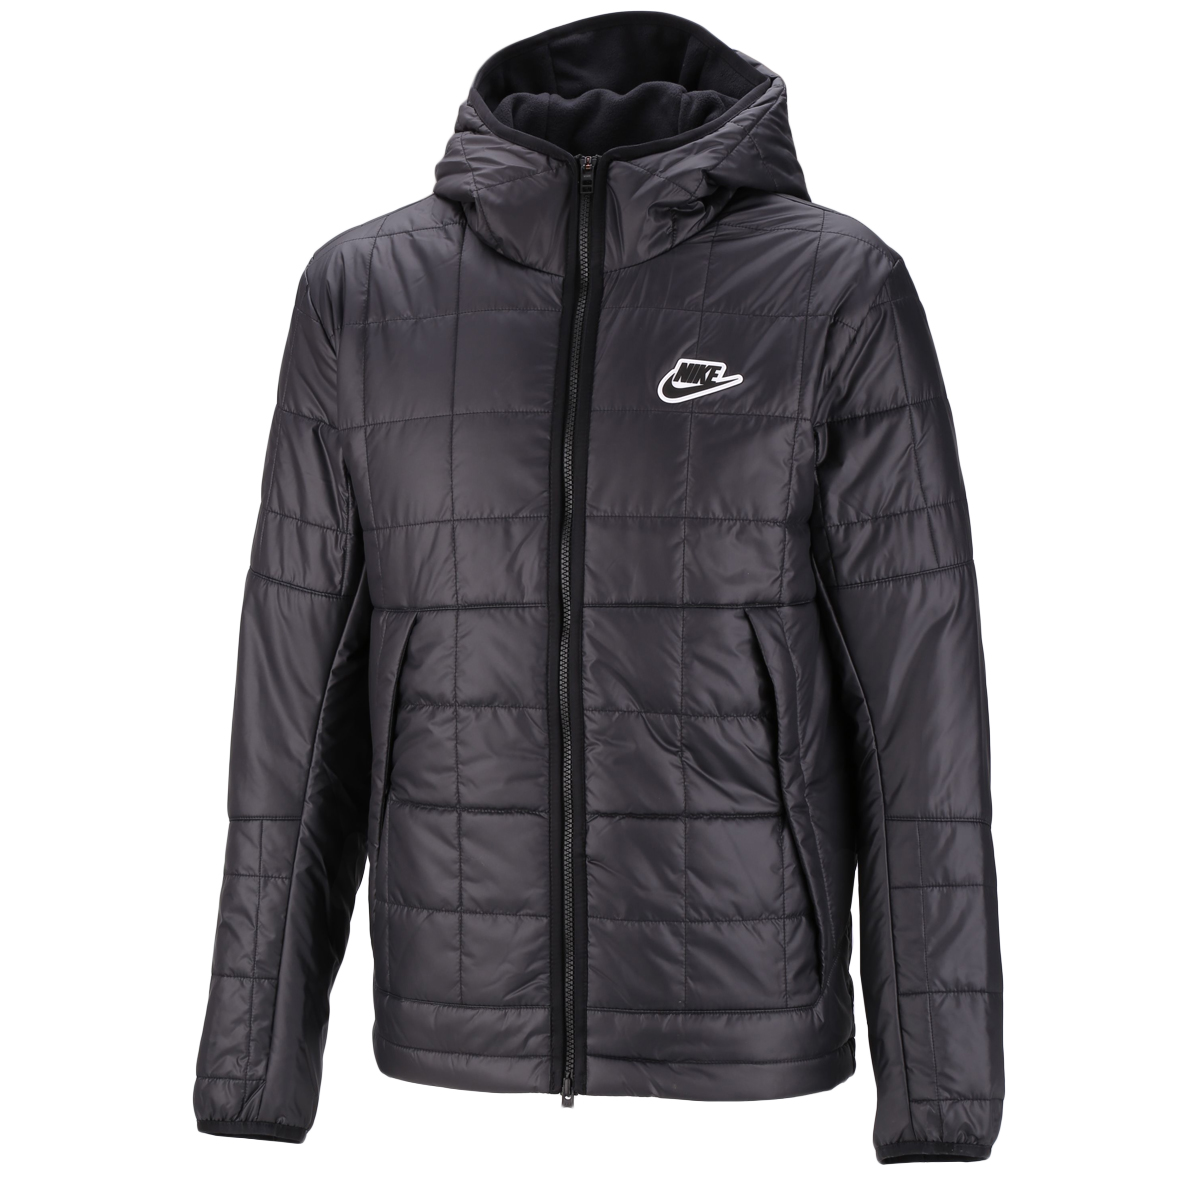 Campera Nike Sportswear Synthetic-Fill,  image number null